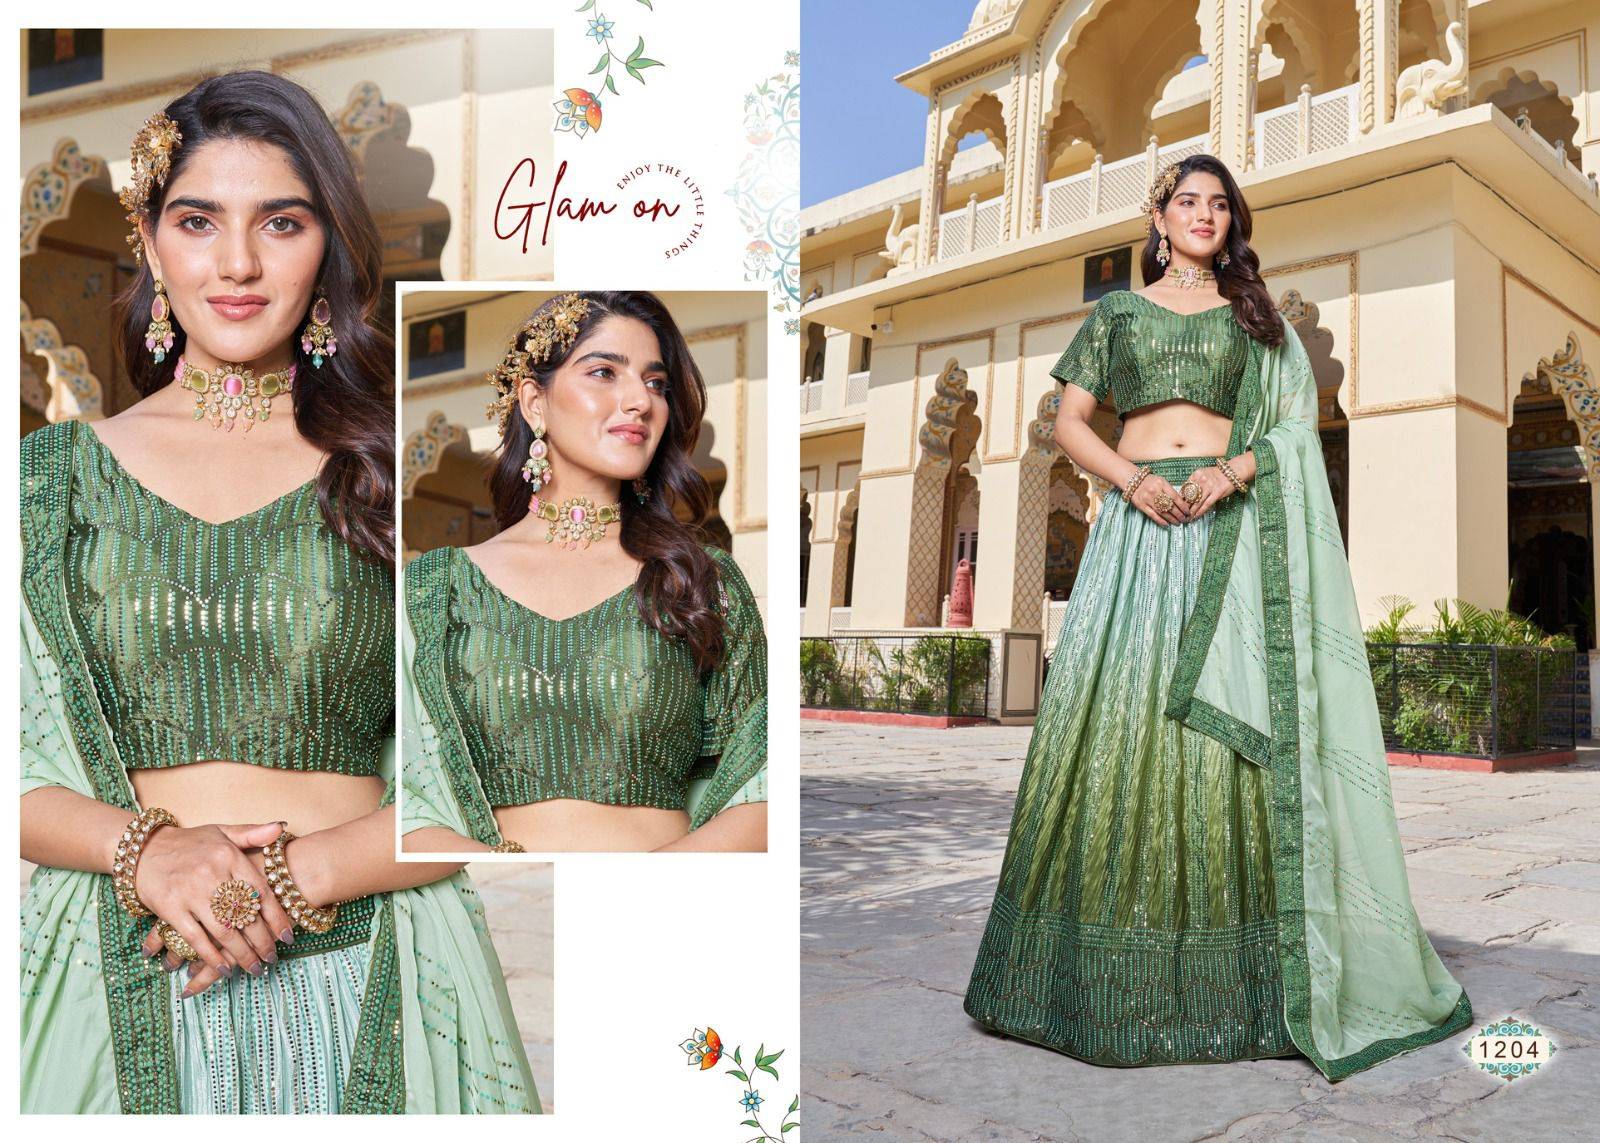 Heeriye By Vouche 1201 To 1205 Series Bridal Wear Collection Beautiful Stylish Colorful Fancy Party Wear & Occasional Wear Soft Organza Lehengas At Wholesale Price